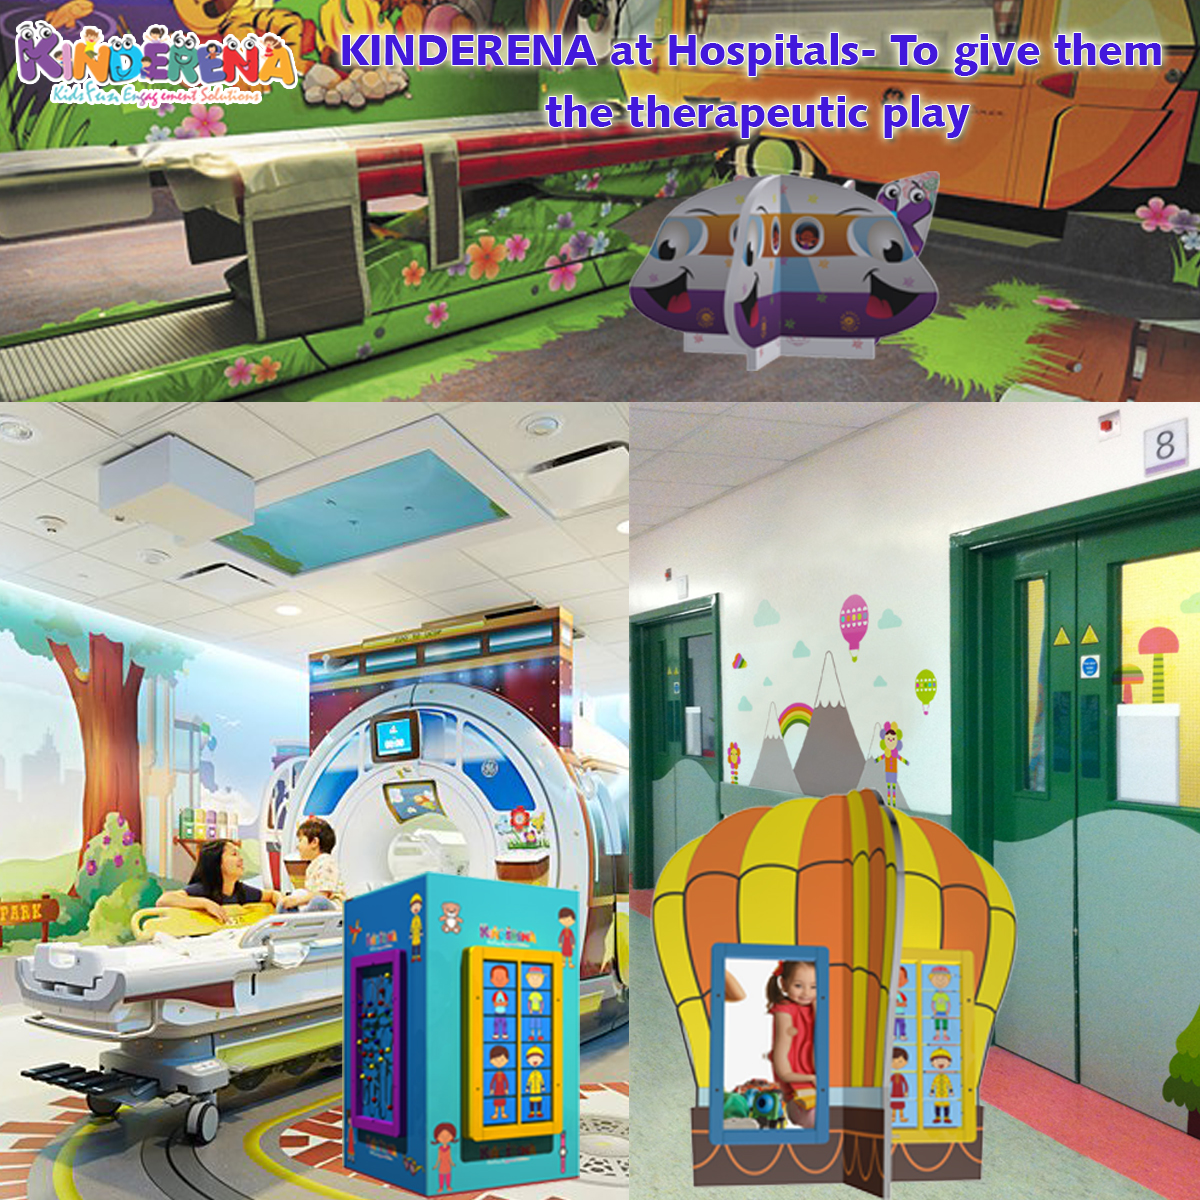 KINDERENA at Hospitals- To give them the therapeutic play.